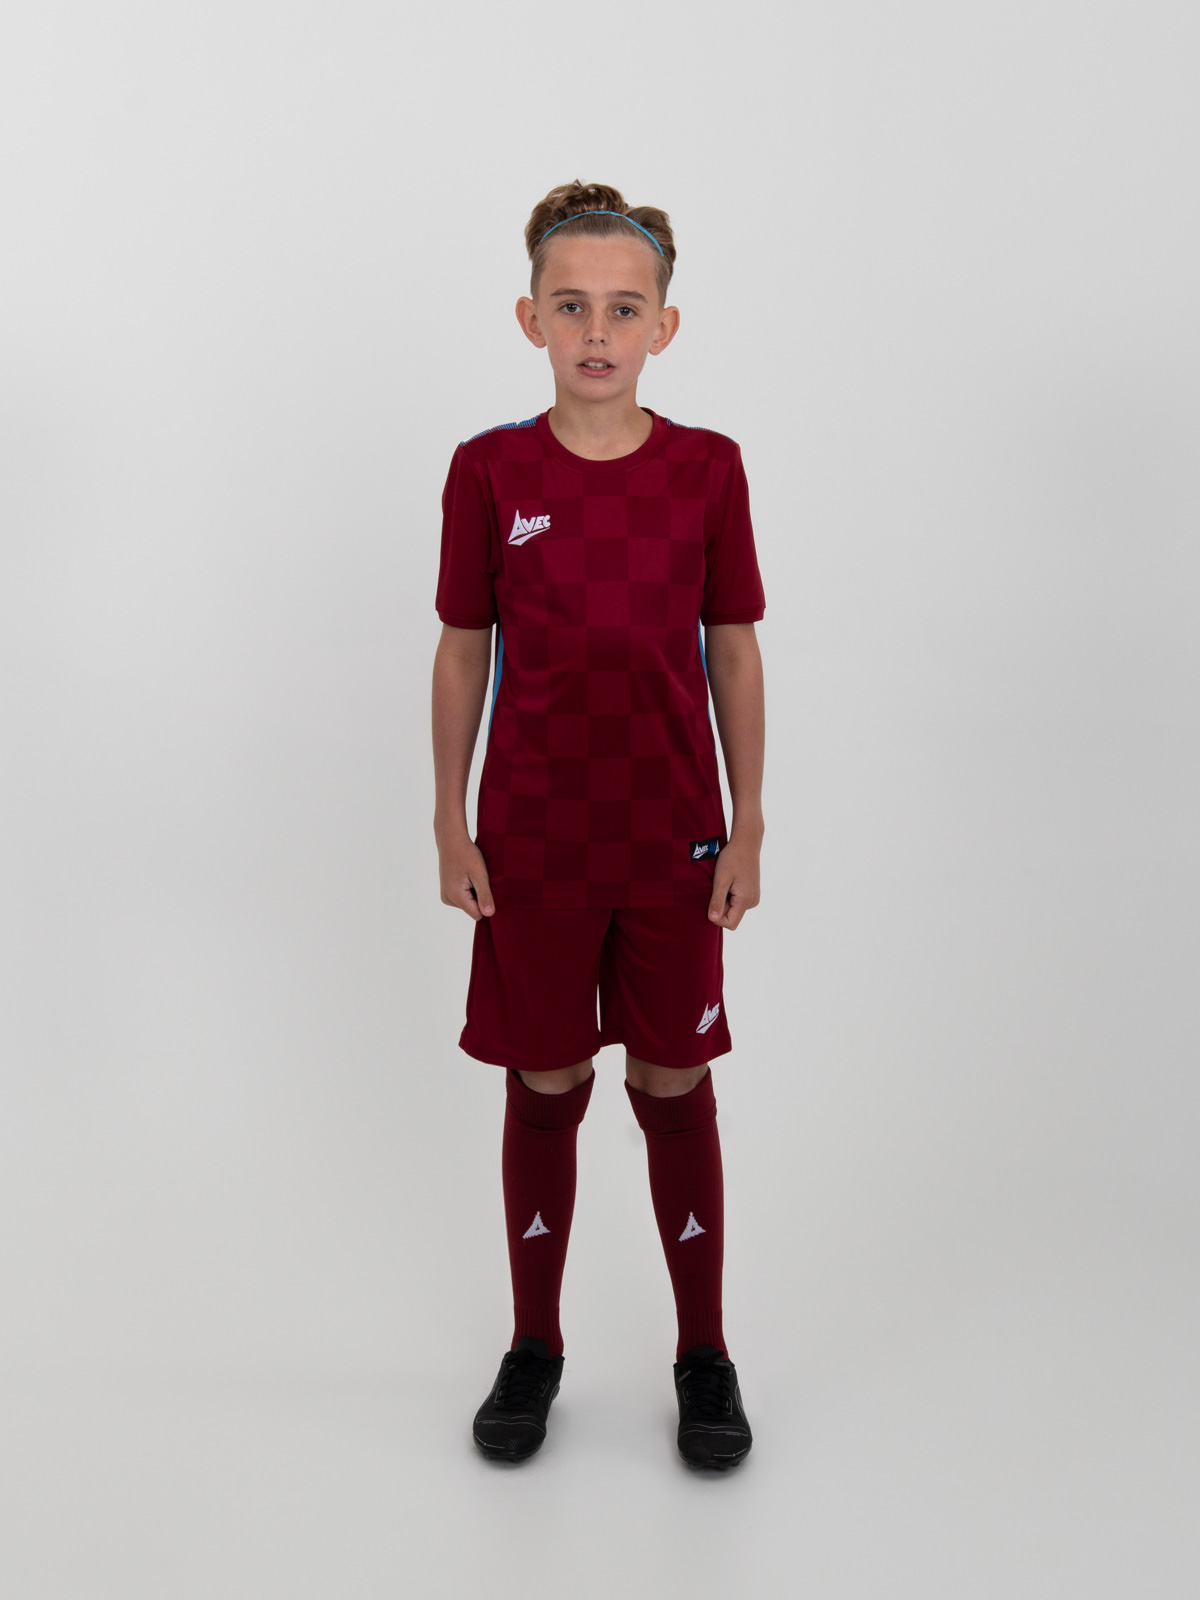 a young boy is wearing a full claret football kit with sky blue trim